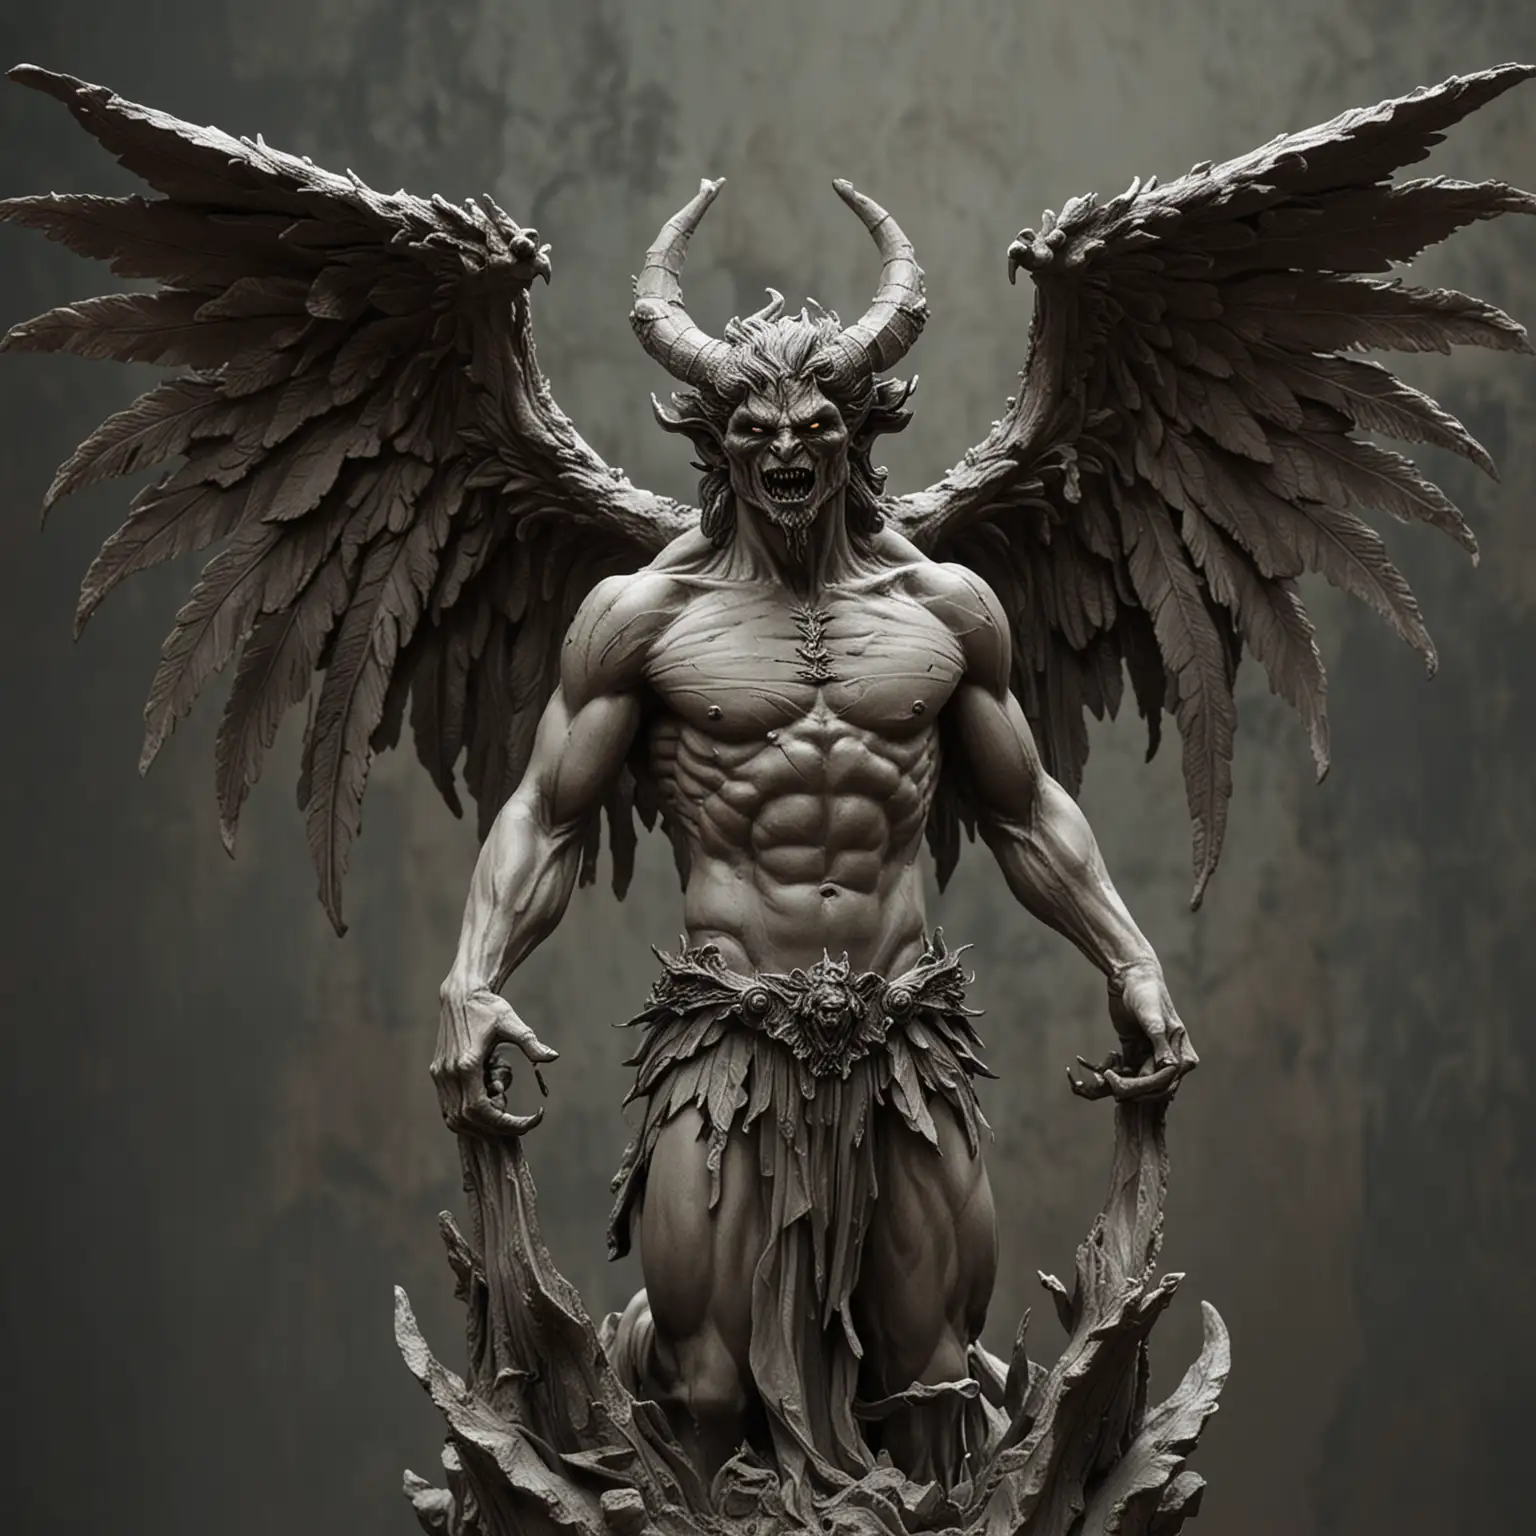 Winged-Demon-Statue-Intricately-Carved-Mythical-Creature-Sculpture